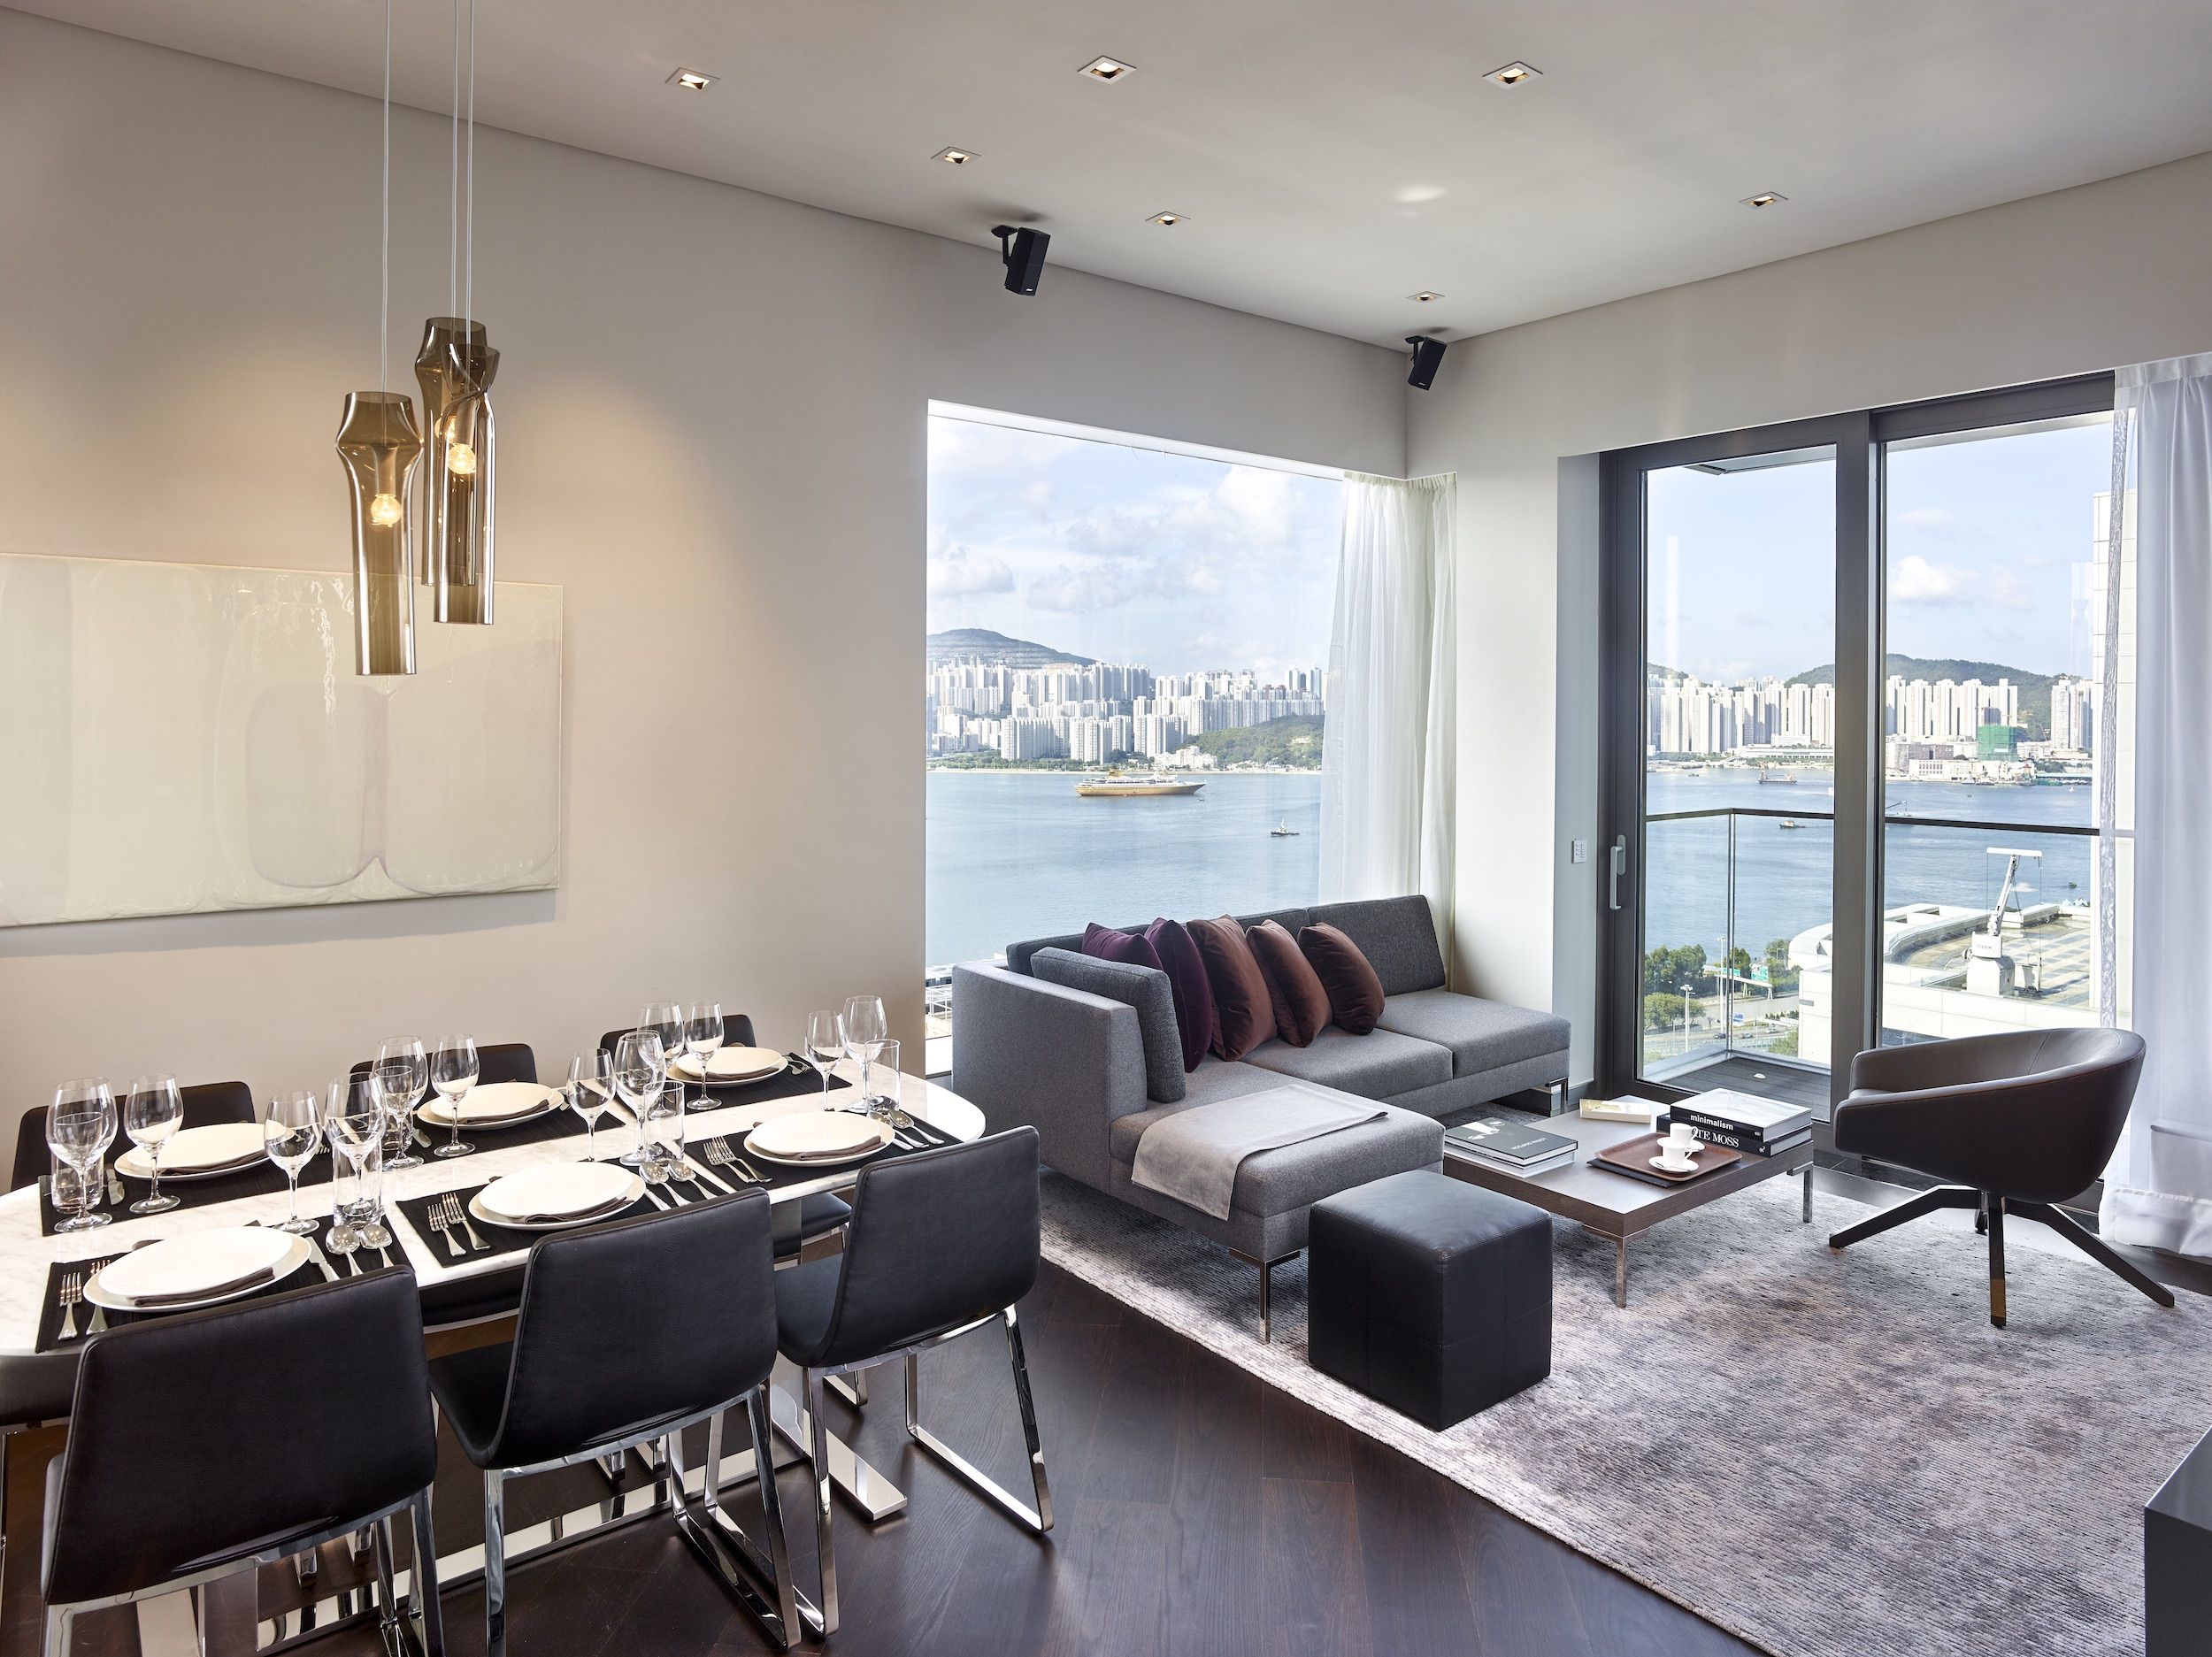 These luxury serviced apartments offer relaxing escapes from work